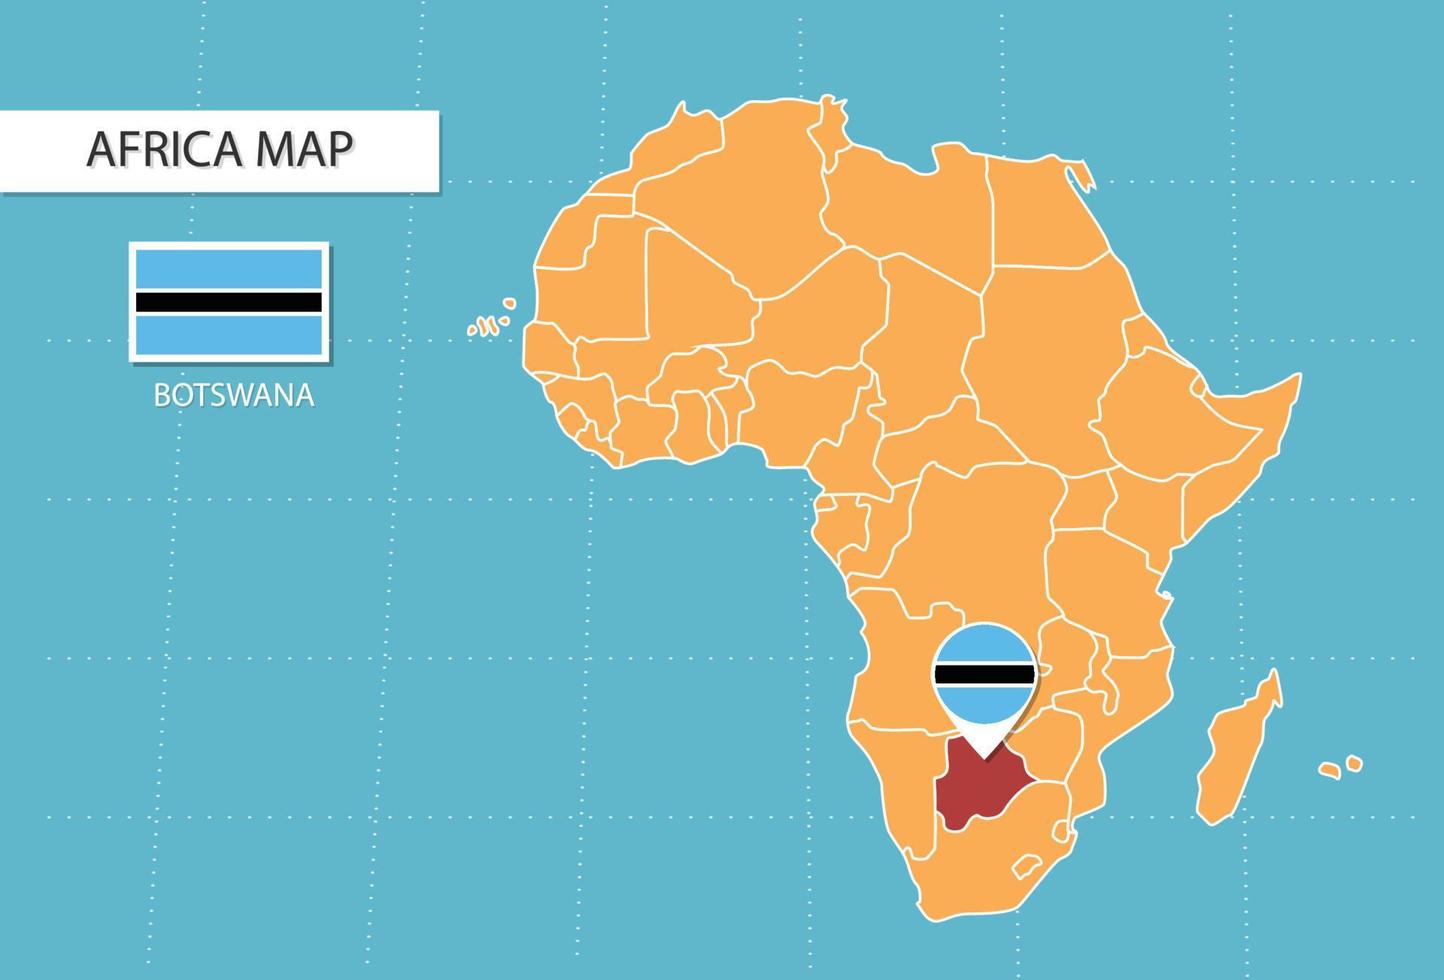 Botswana map in Africa, icons showing Botswana location and flags. vector